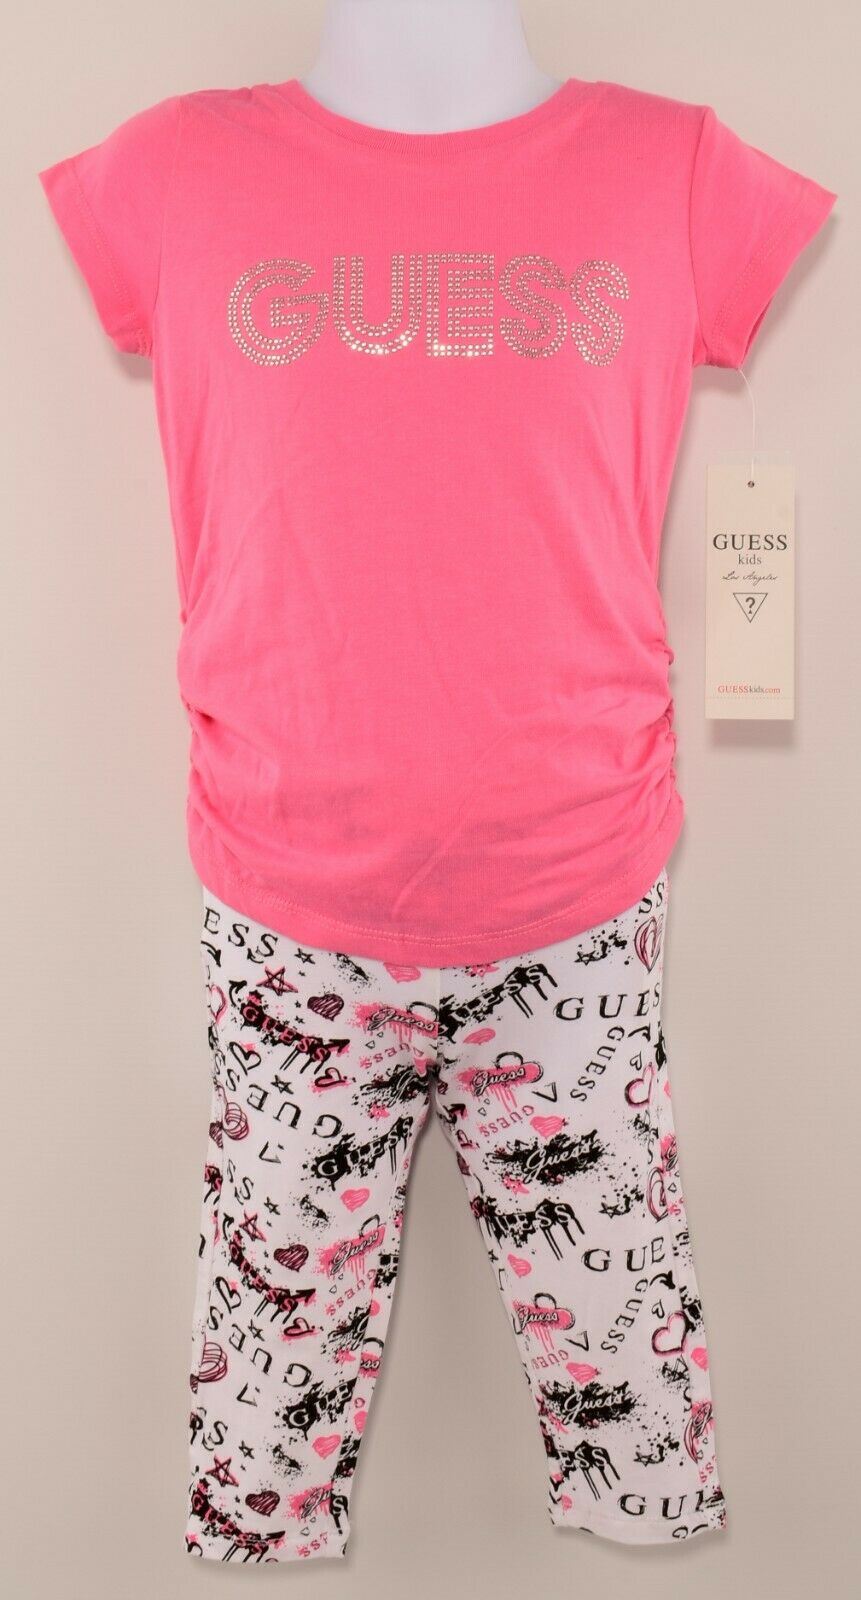 GUESS Girls' 2pc Adorable Summer Outfit, Top & Leggings, Pink/White, 4 years